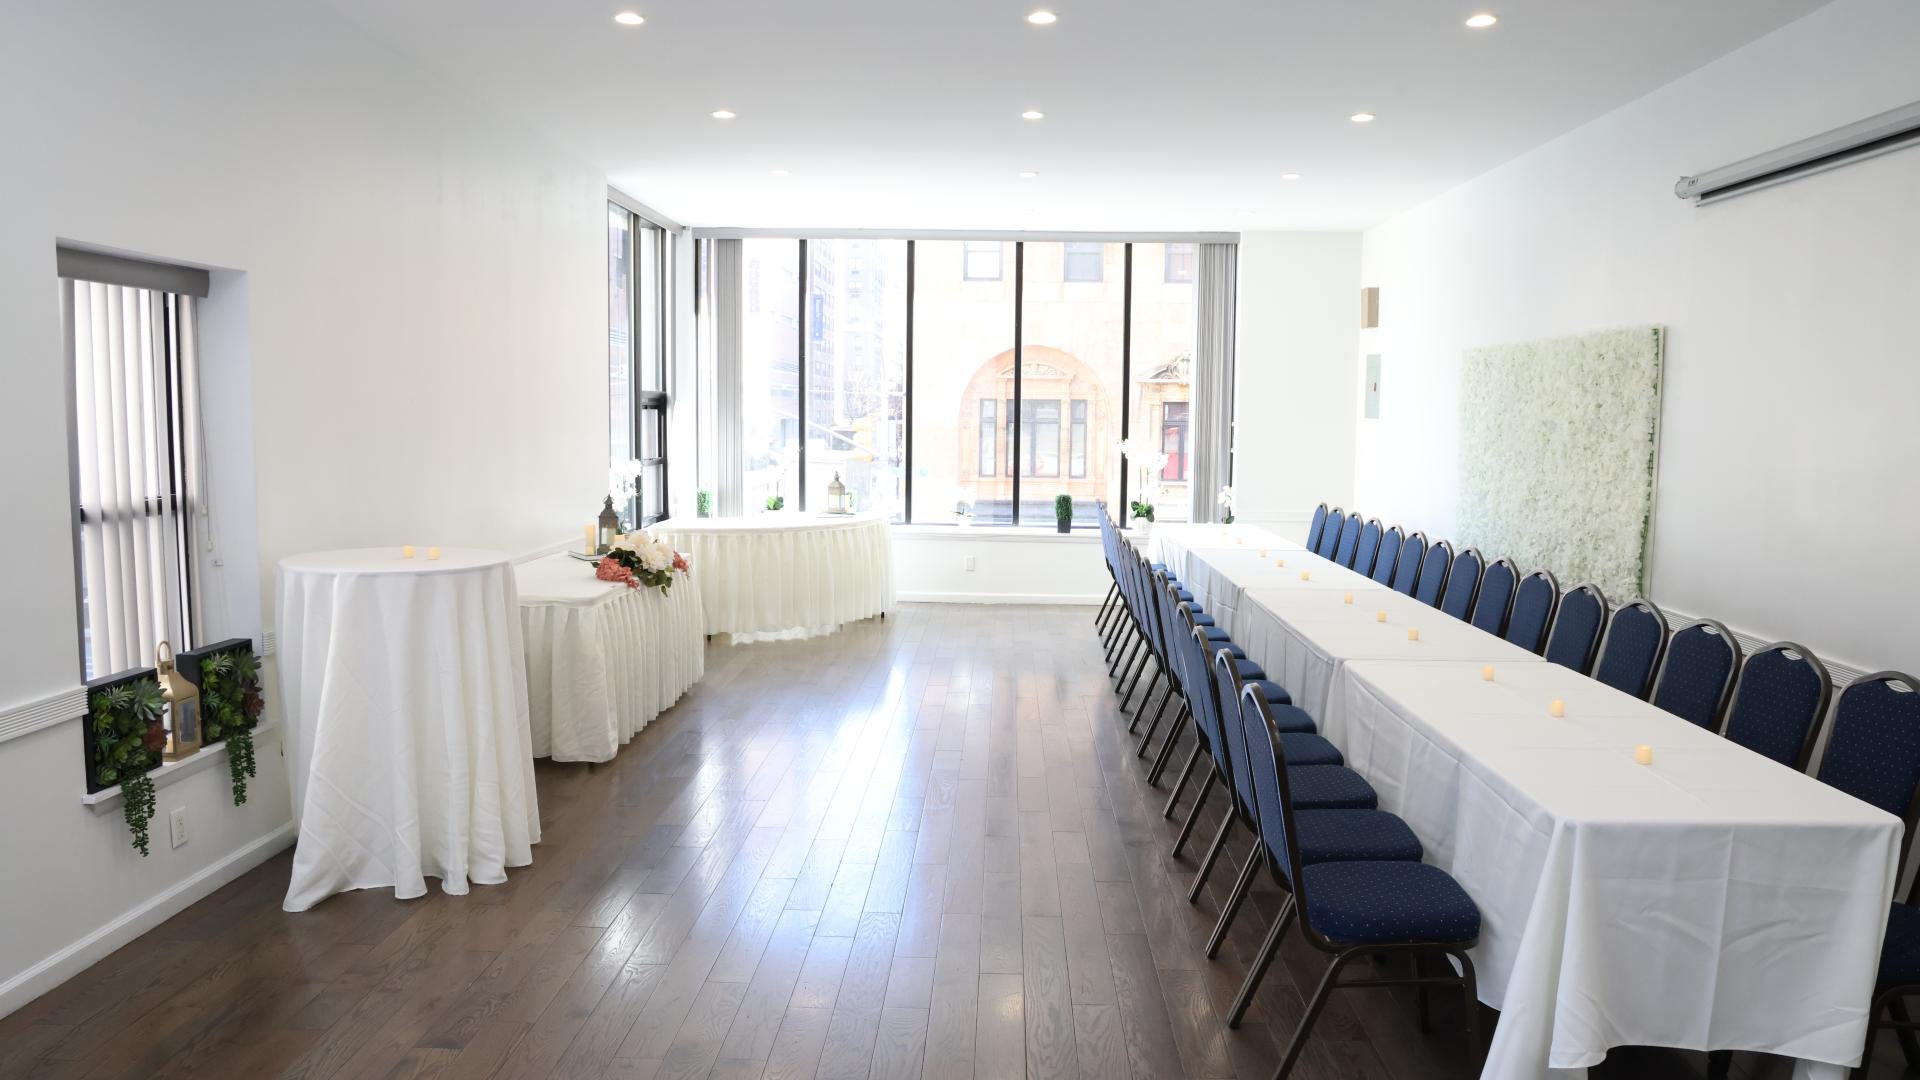 Baby Shower Venues for Rent in Manhattan, NY